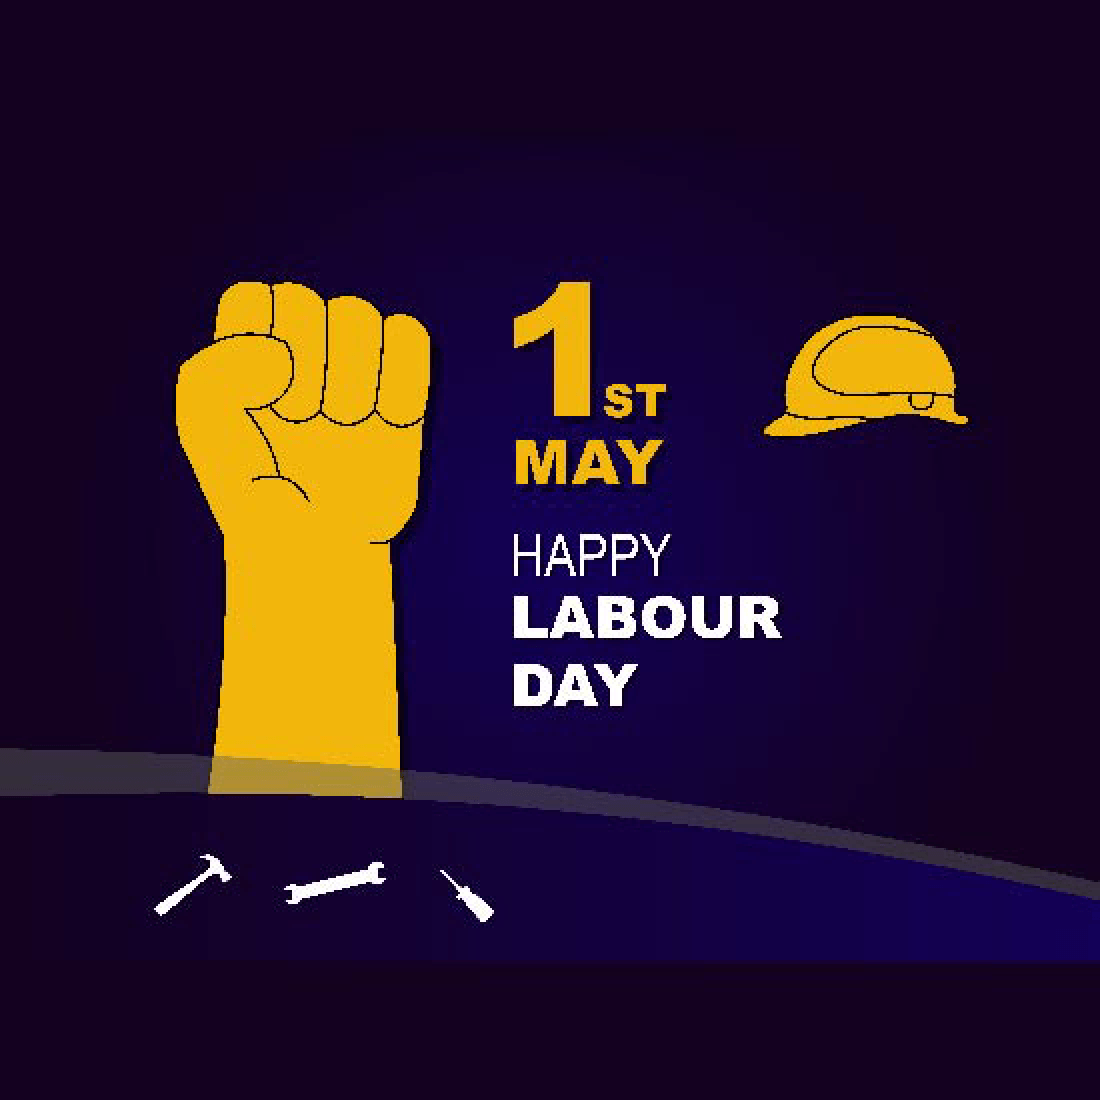 Happy International Labour day happy international workers day labor day and may day celebration design 1st May vector illustration 4000x3000px cover image.